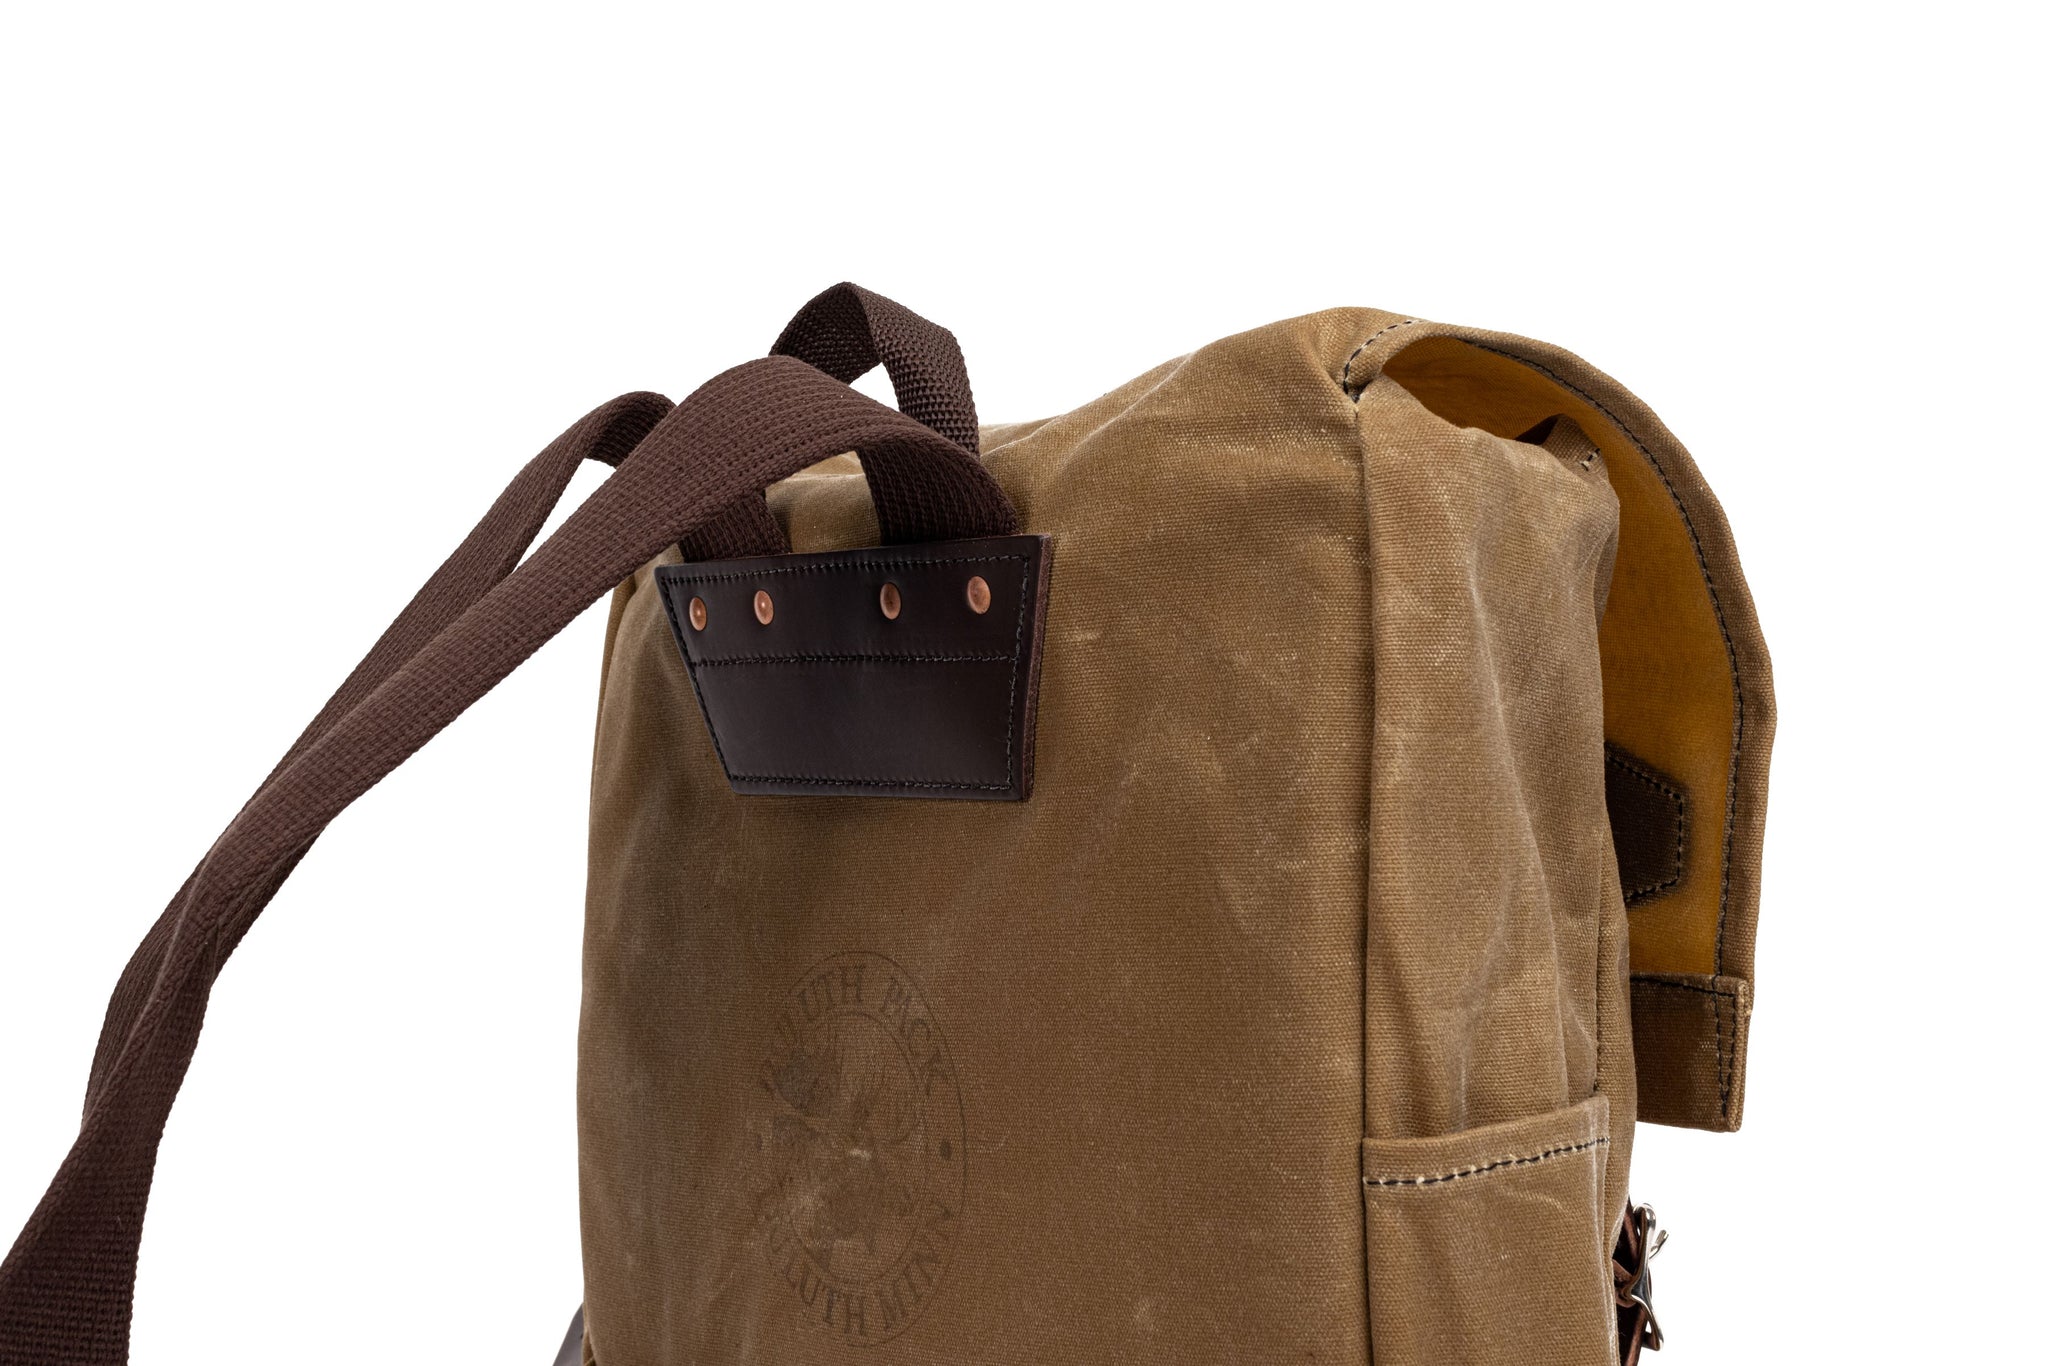 21 Liter Capacity Waxed Canvas Standard Backpack – Thomas Ferney